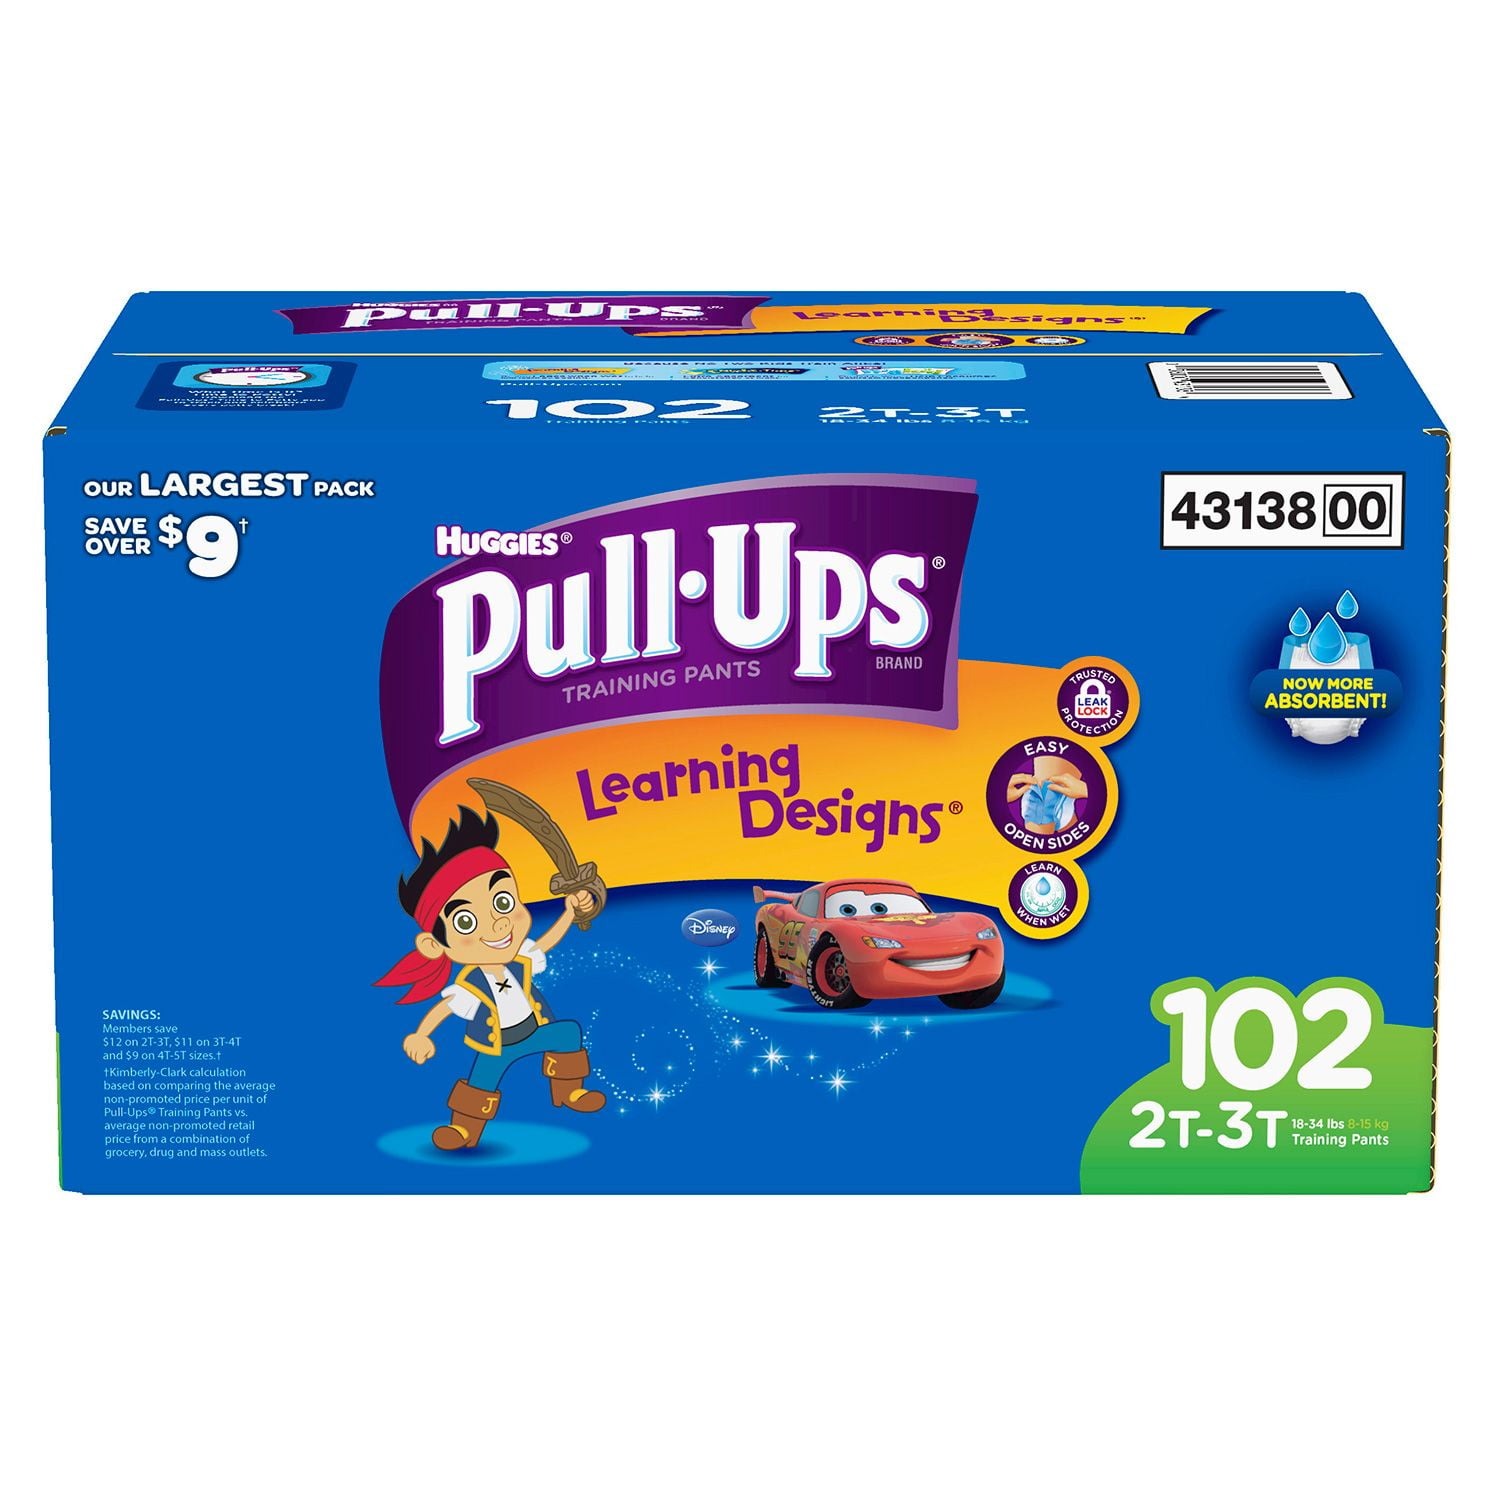 Huggies Pull-Ups Training Pants for Boys M 2T-3T 102 Count